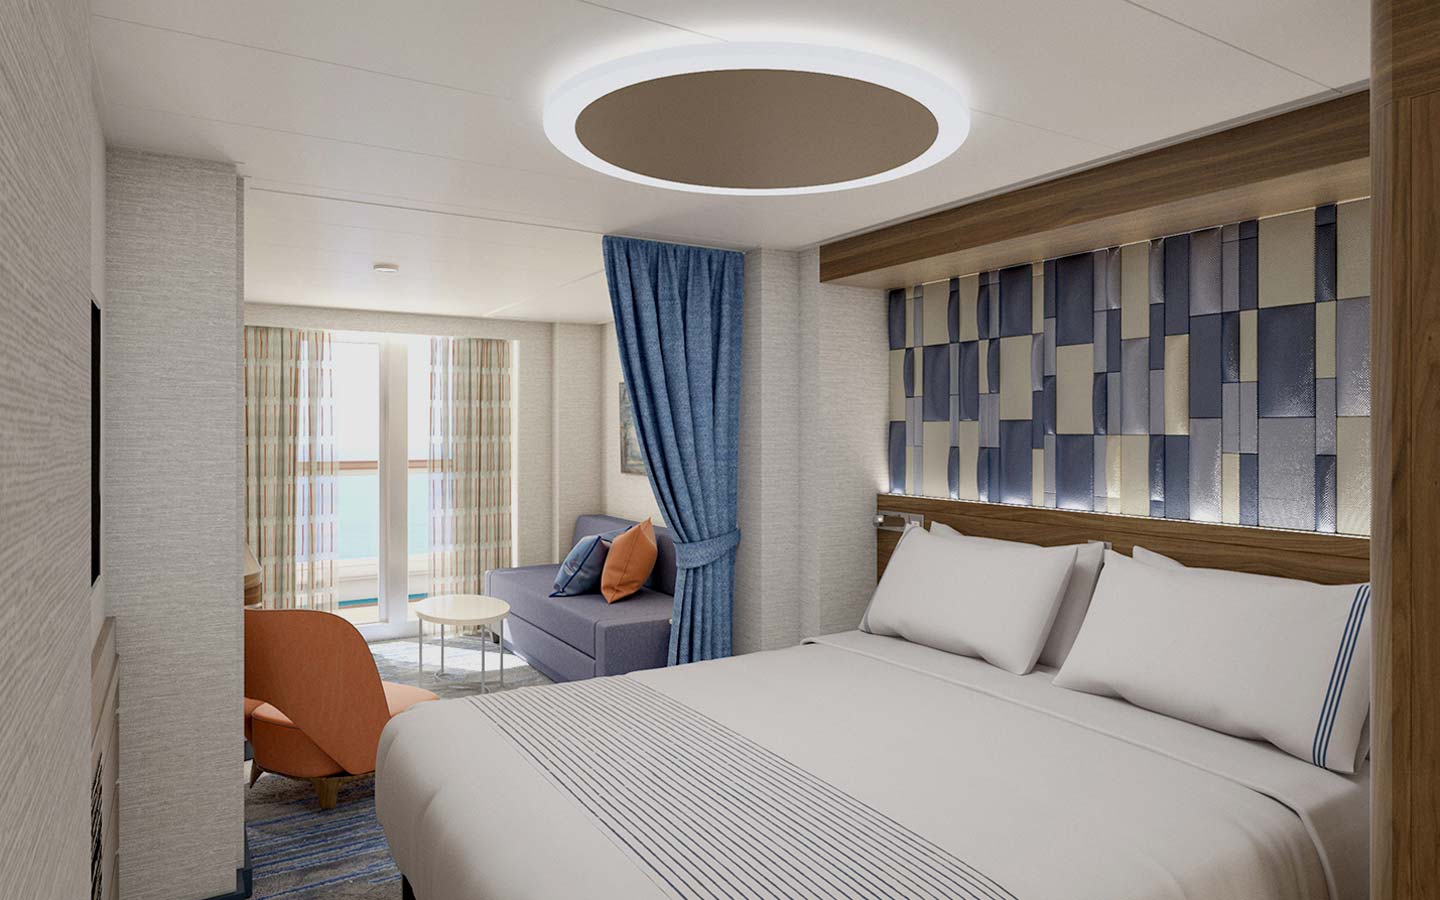 a stateroom with modern designs and a cool color scheme